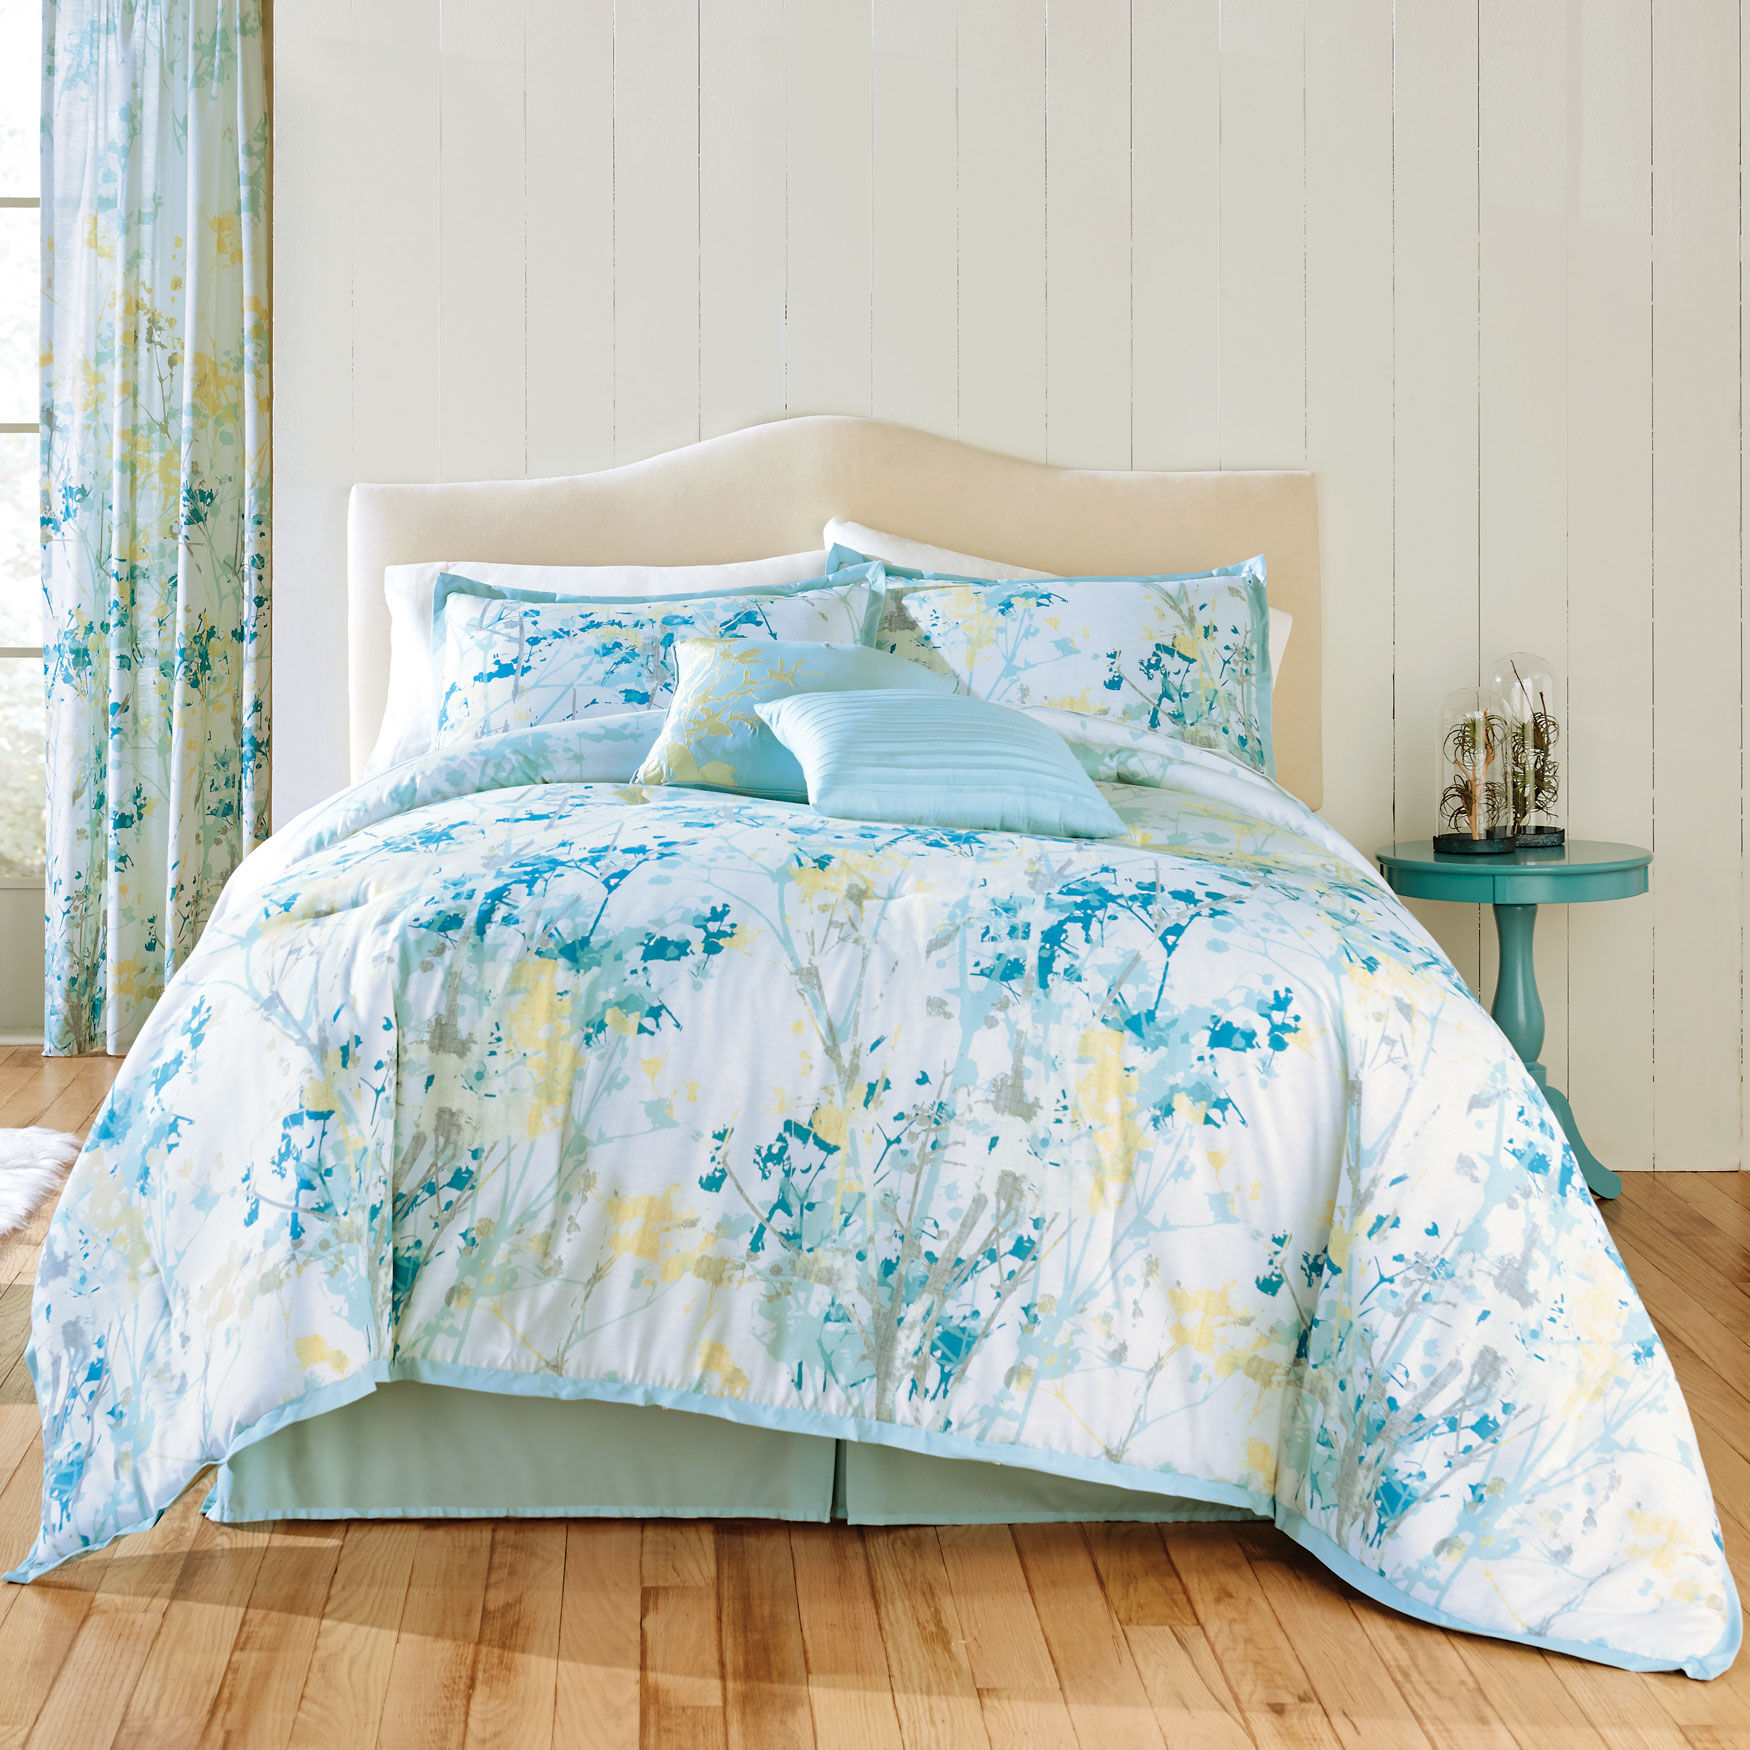 Bedding: Bed Covers, Comforters & Sets | Brylane Home